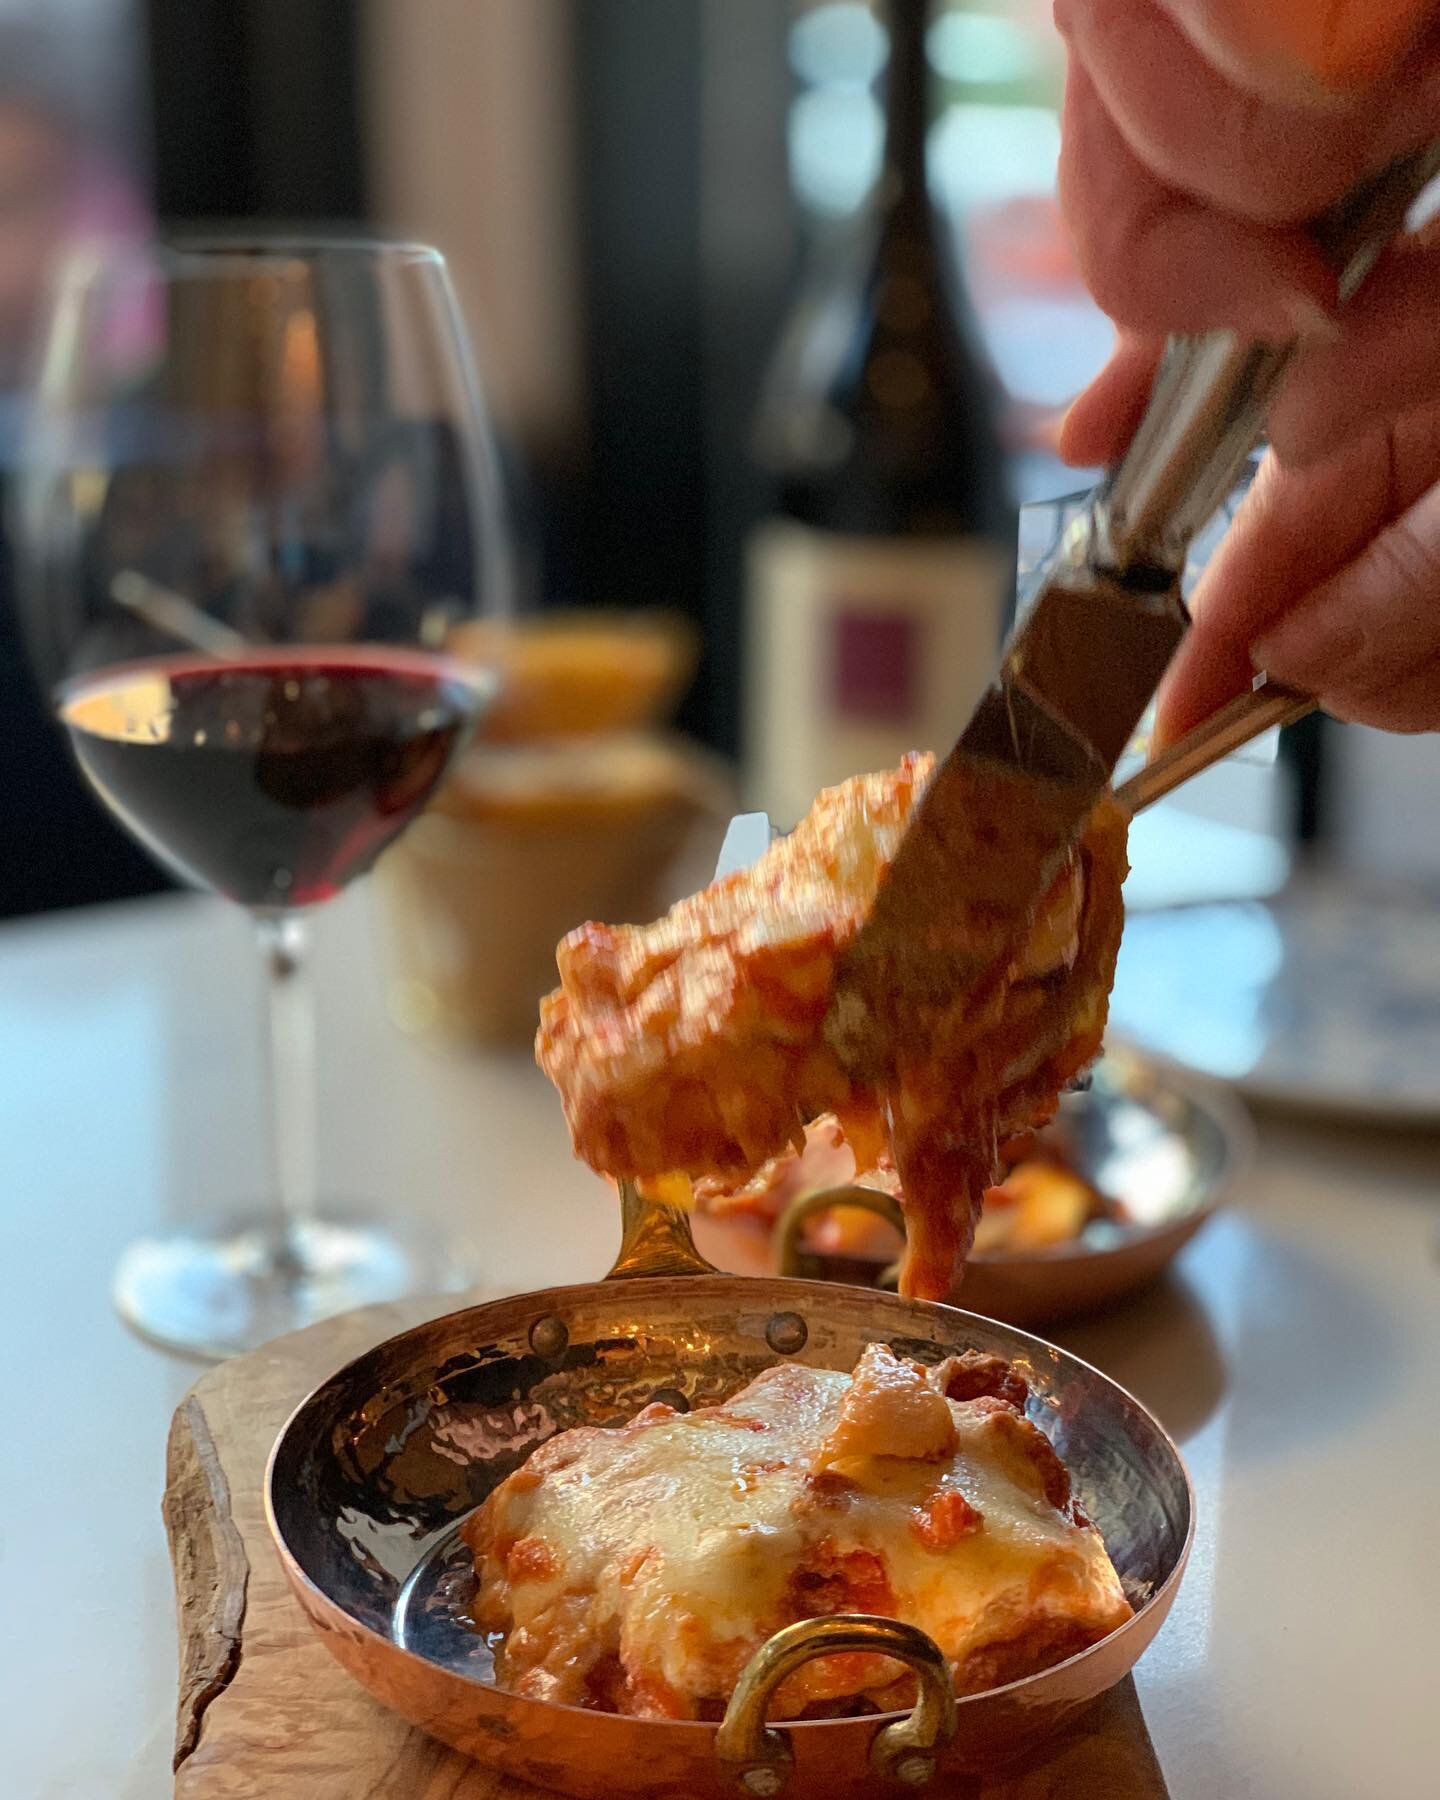 Qb Lasagna Season
Order Yours for the holidays!!!

#qbtheplacetobe
.
.
.

Call to book a table or order your favourite take out
416-962-3141
.
.
.
.
.
.
.
.

##torontofood #foodporn #foodie #sommelier#foodieofinstagram #cocktails #italian #torontopat